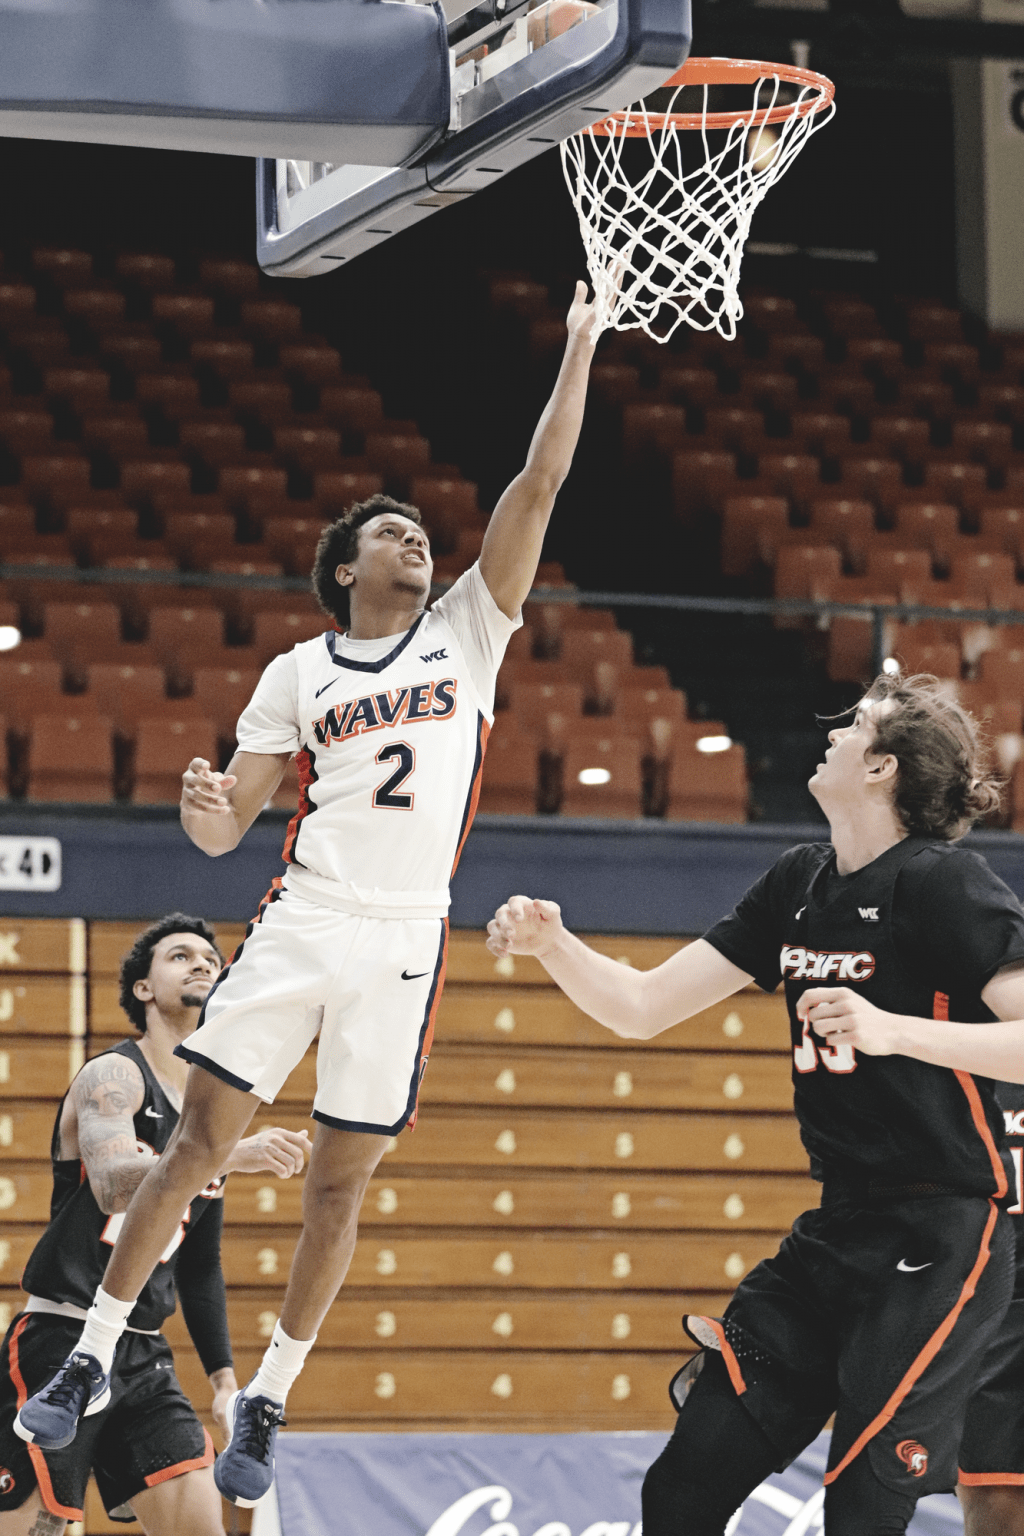 Junior guard Darryl Polk Jr. extends for a soft layup at the rim during the second half.